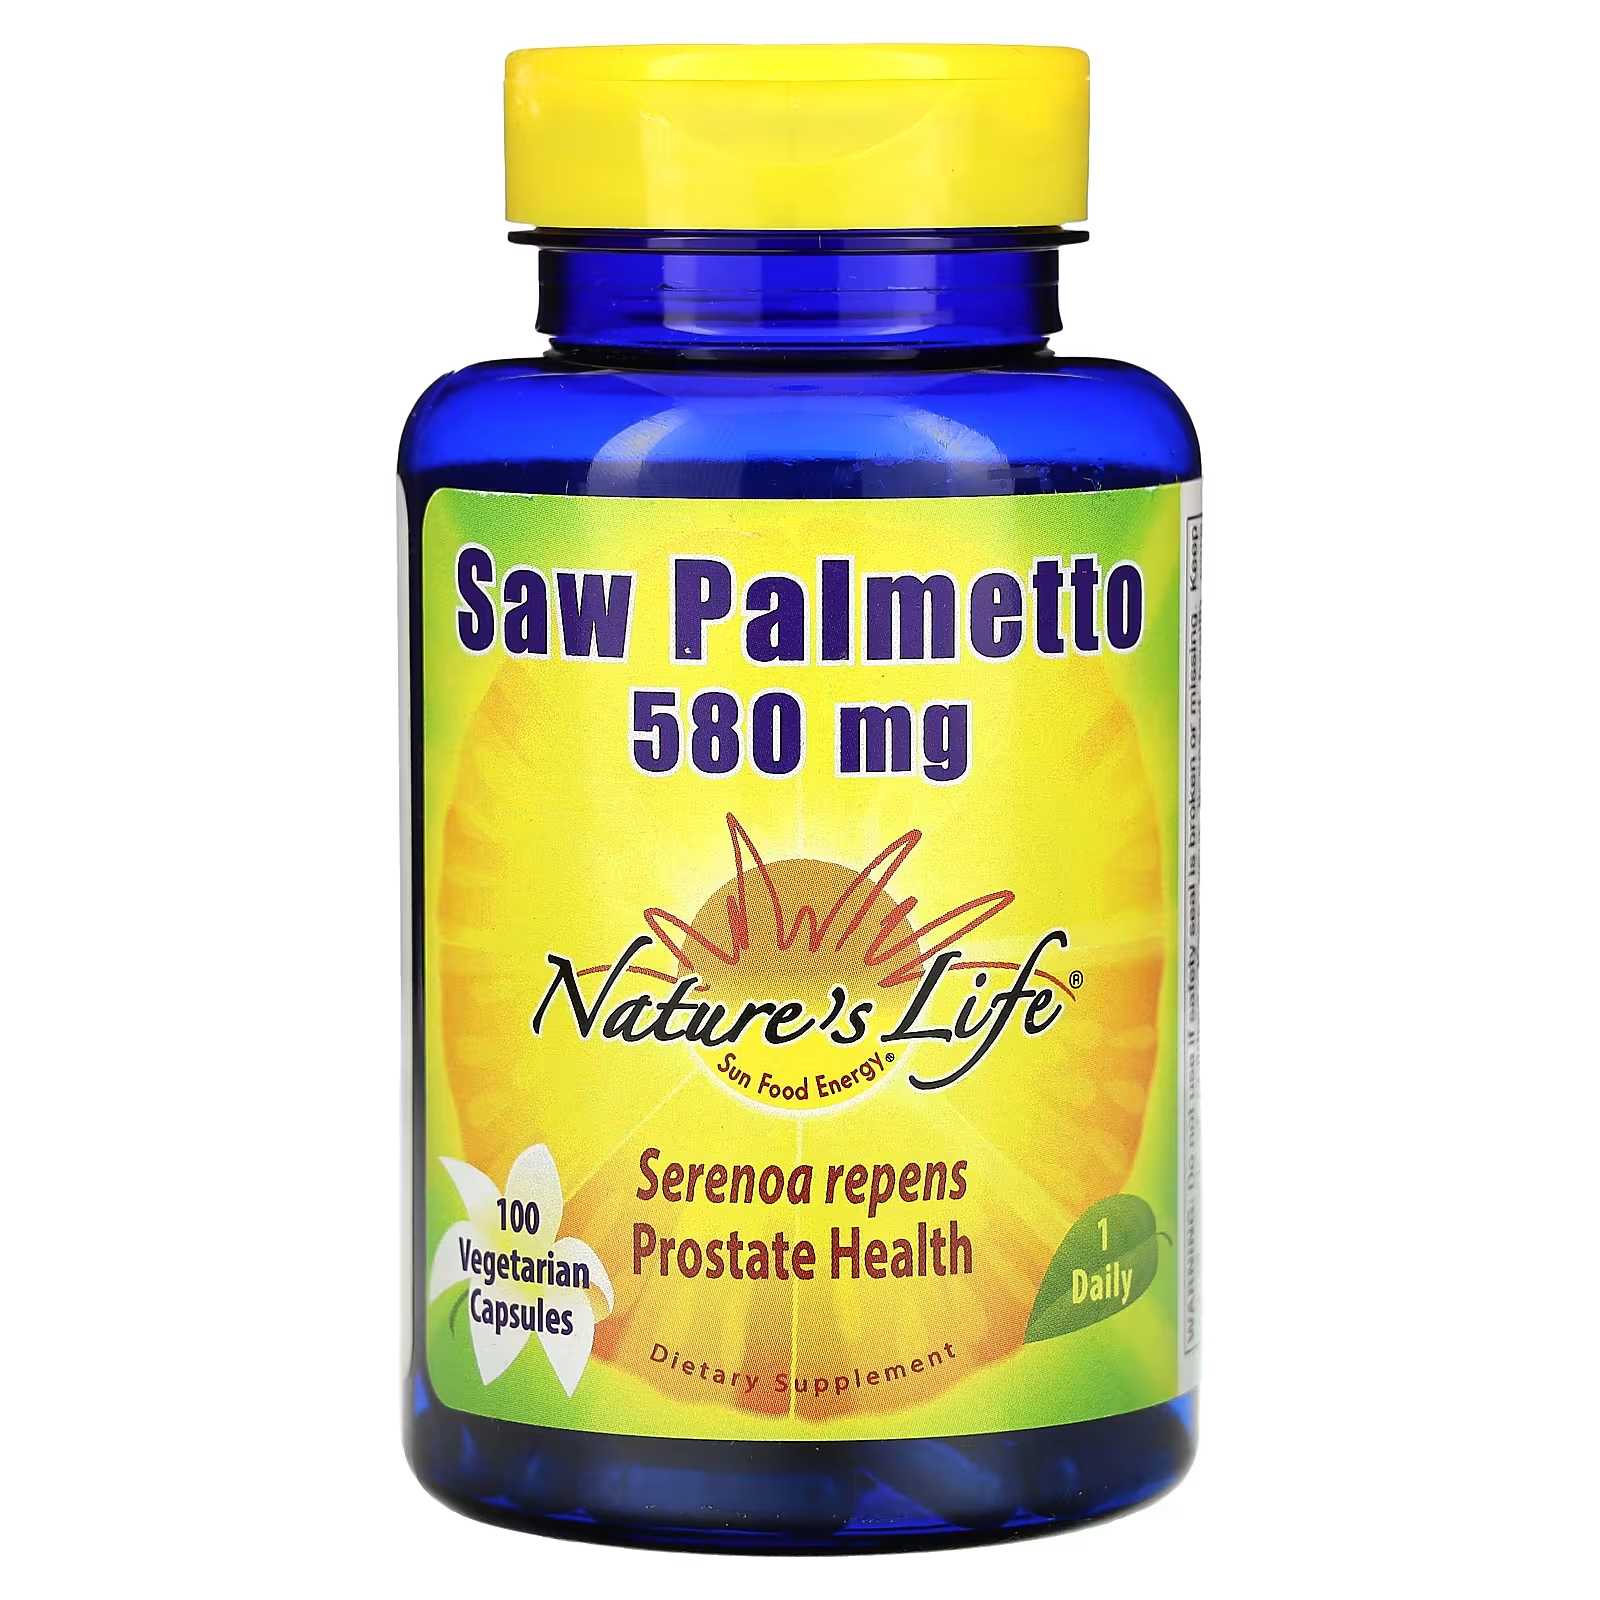 Nature's Life Saw Palmetto 580 мг 100 вегетарианских капсул nature s life saw palmetto 580 мг 100 вегетарианских капсул